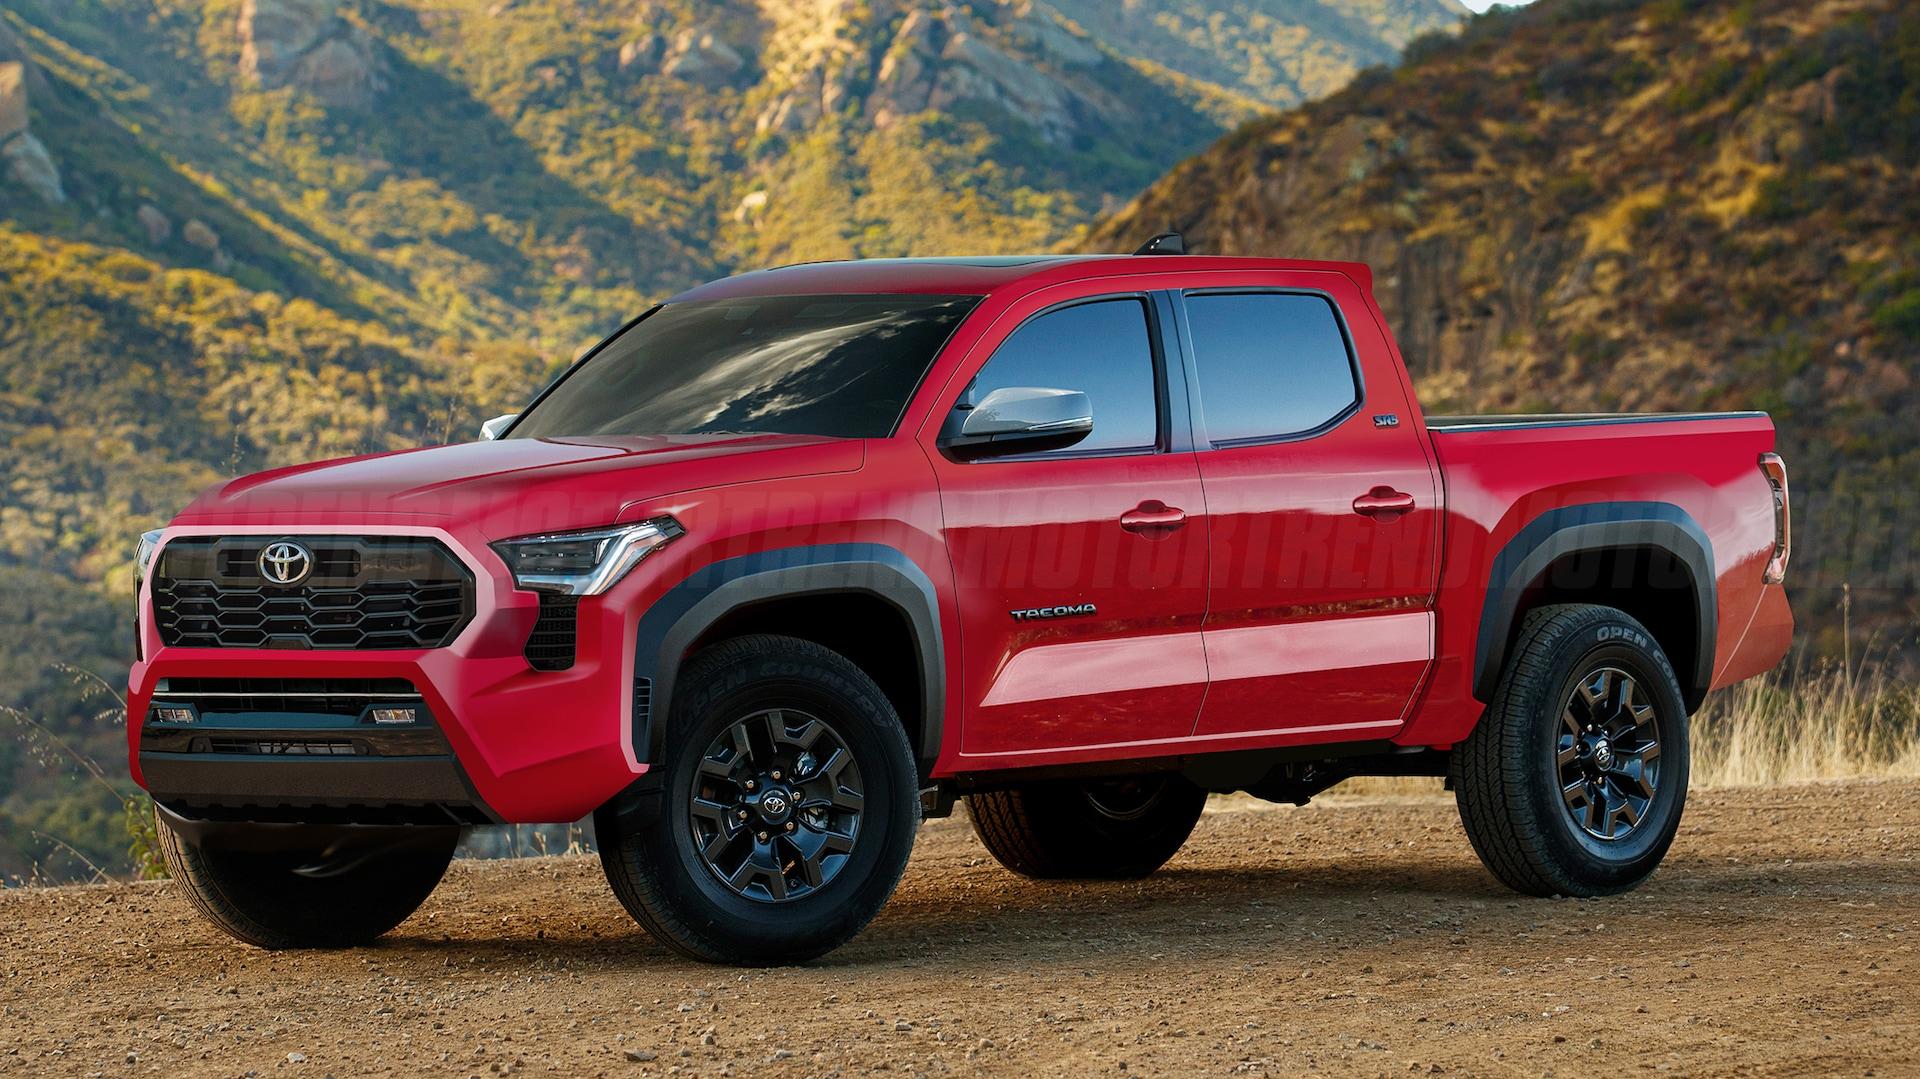 This Is Probably What The Toyota Taa Pickup Will Look Like